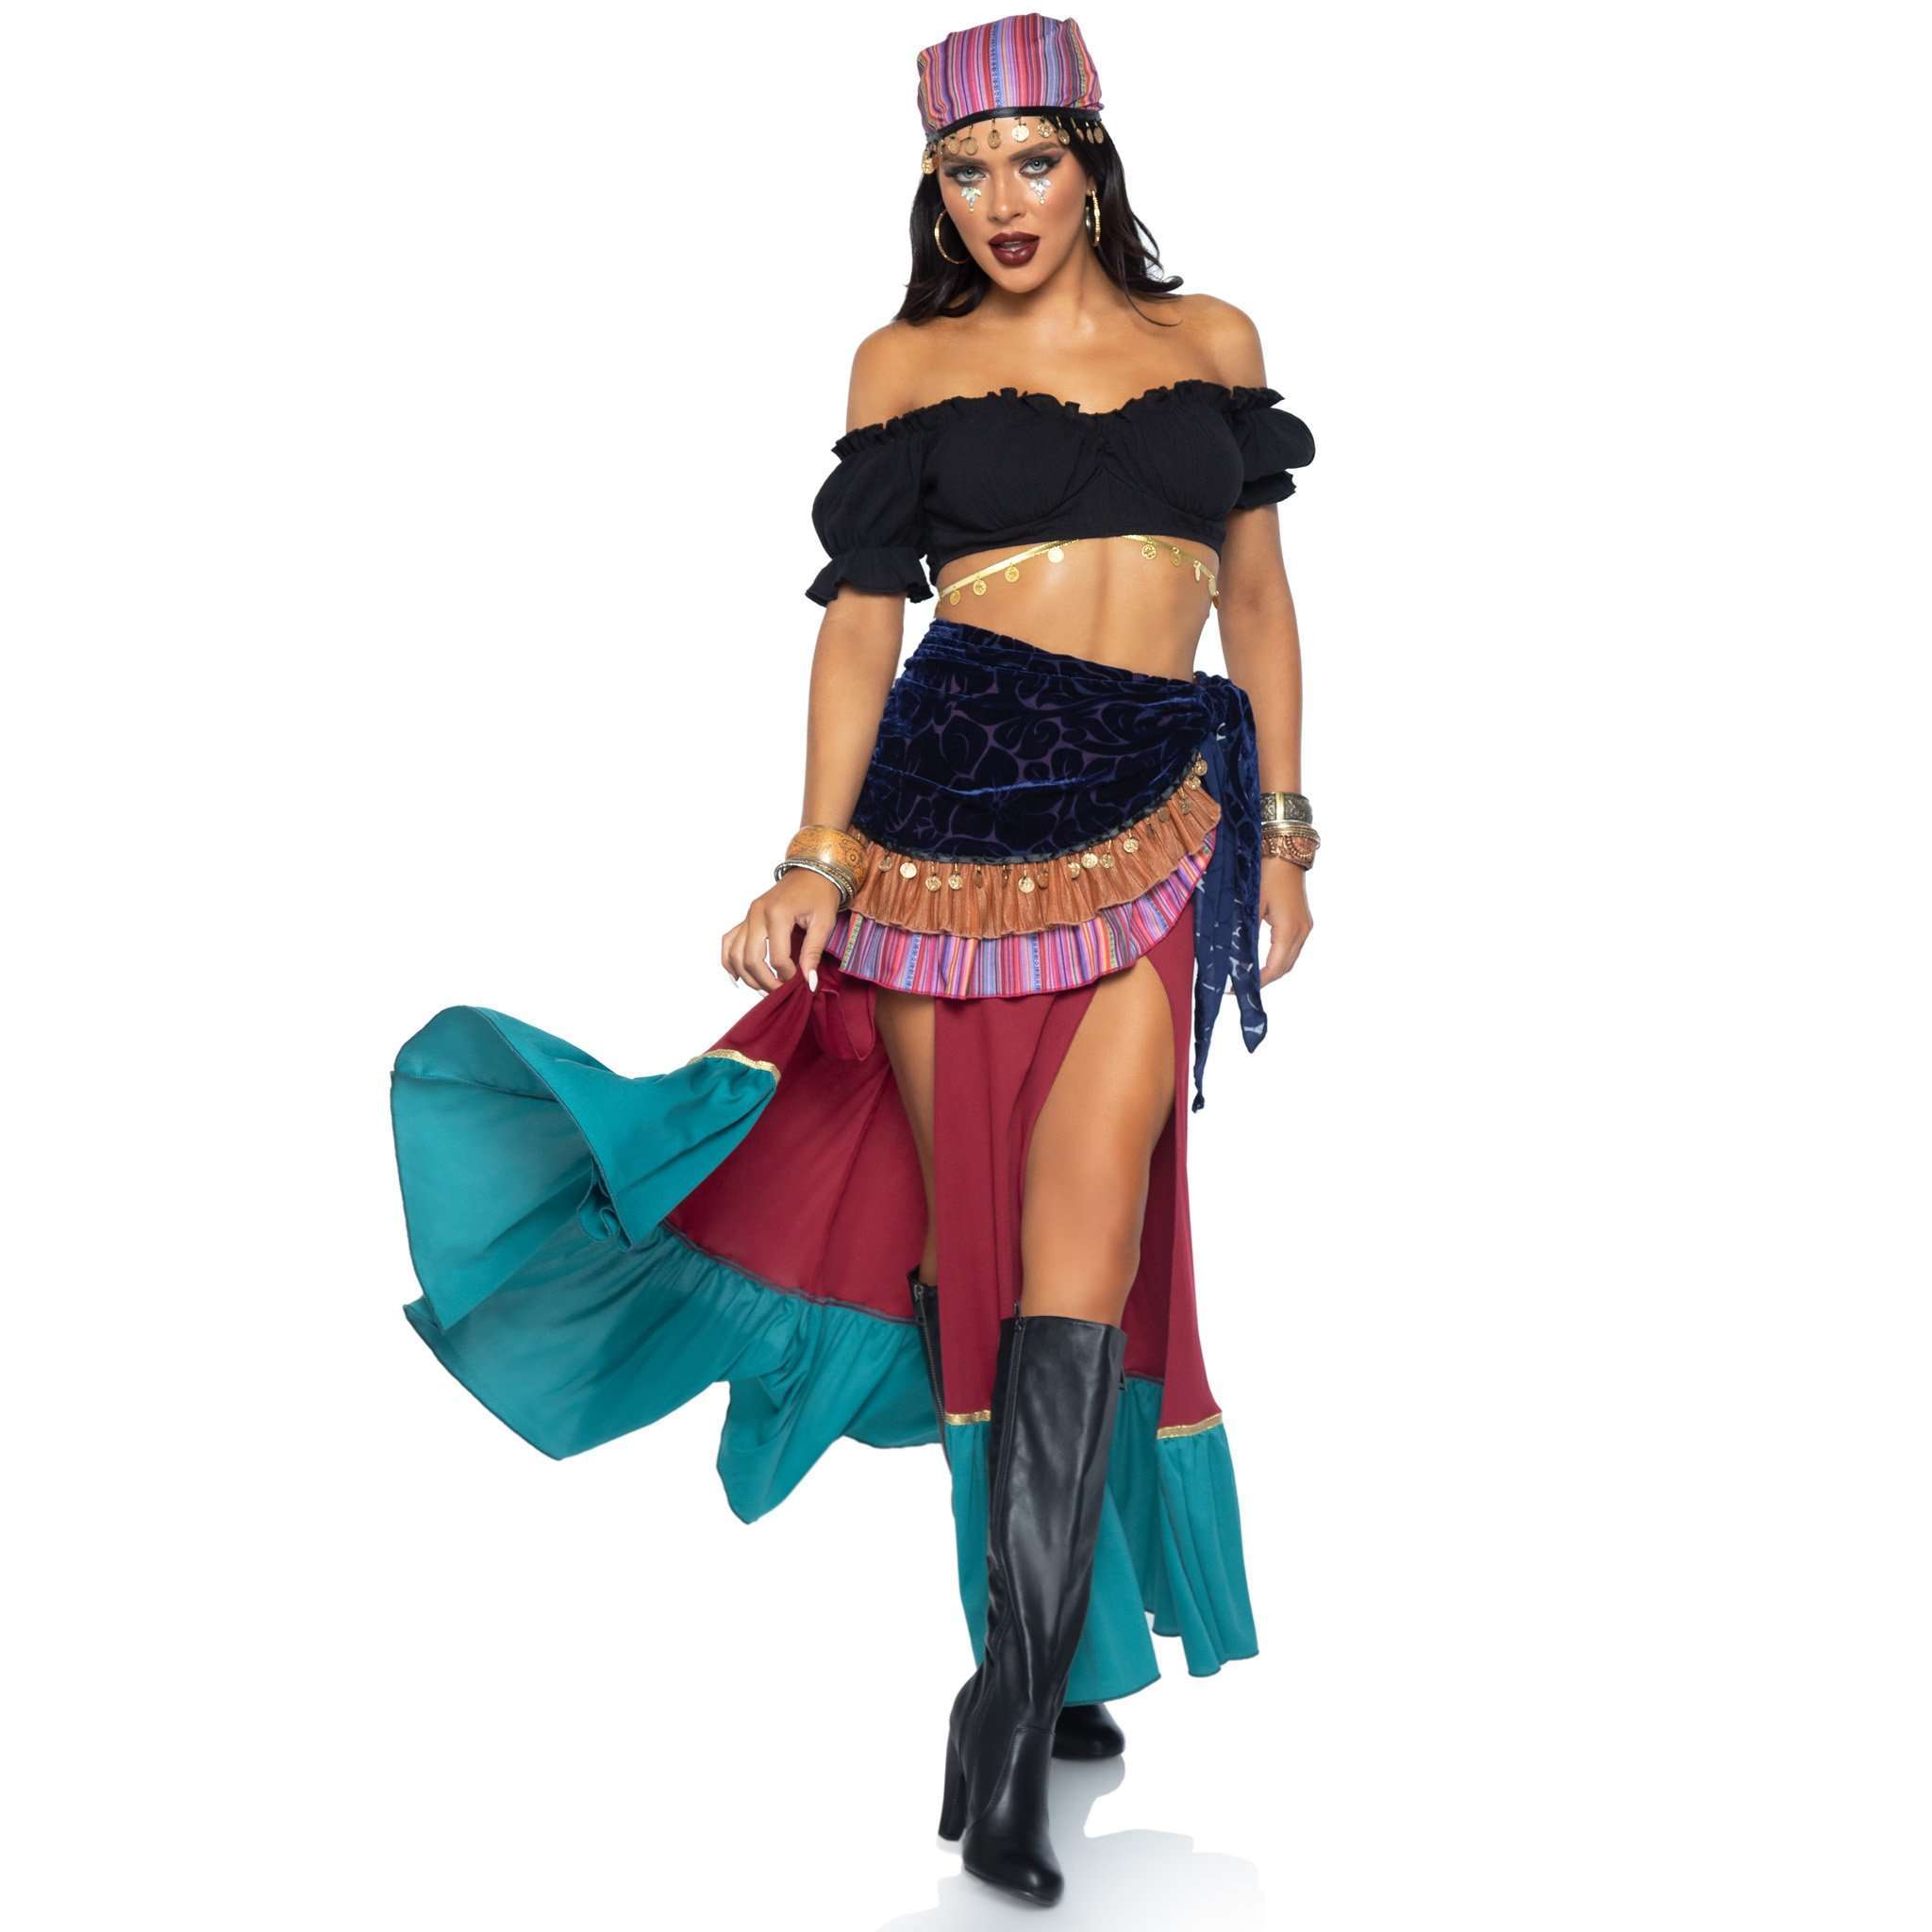 Crystal Ball Beauty Gypsy Queen Adult Costume